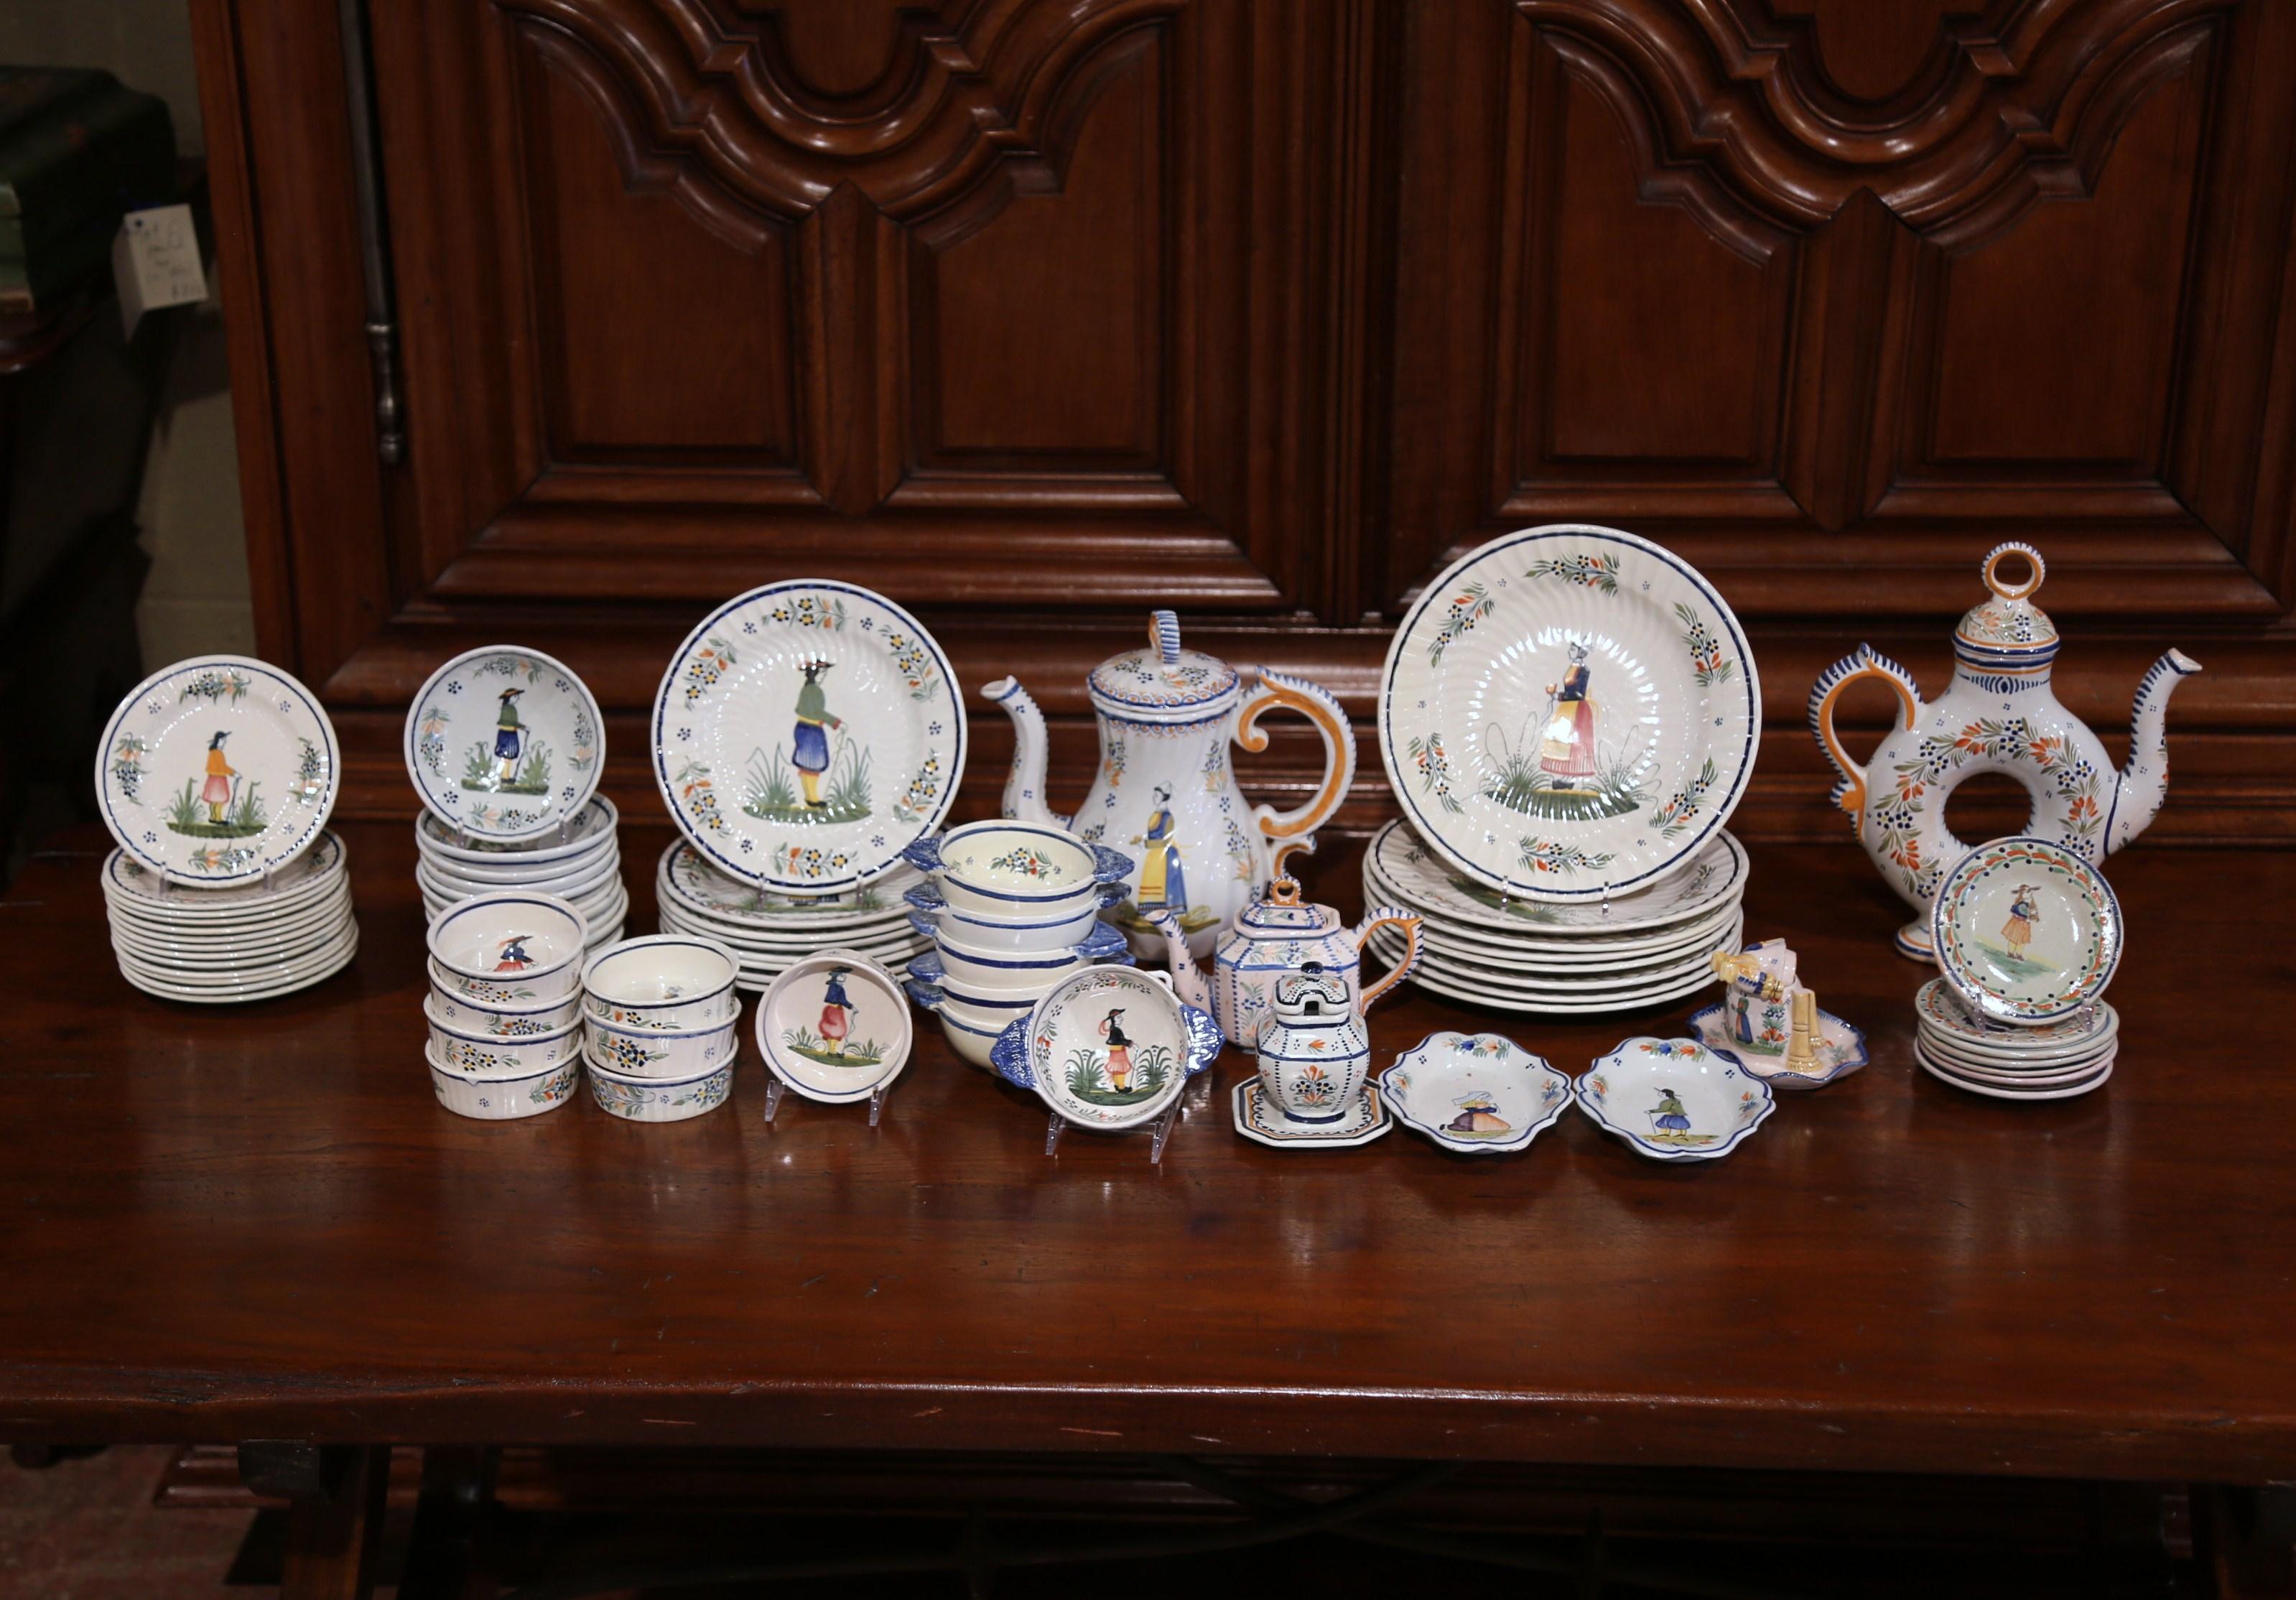 Decorate a kitchen shelving or accessorize a breakfast room vaisselier cabinet with this set of Qimper pottery. The set of about seventy pottery pieces with traditional Breton man and woman figures painted on the front, was crafted and hand painted